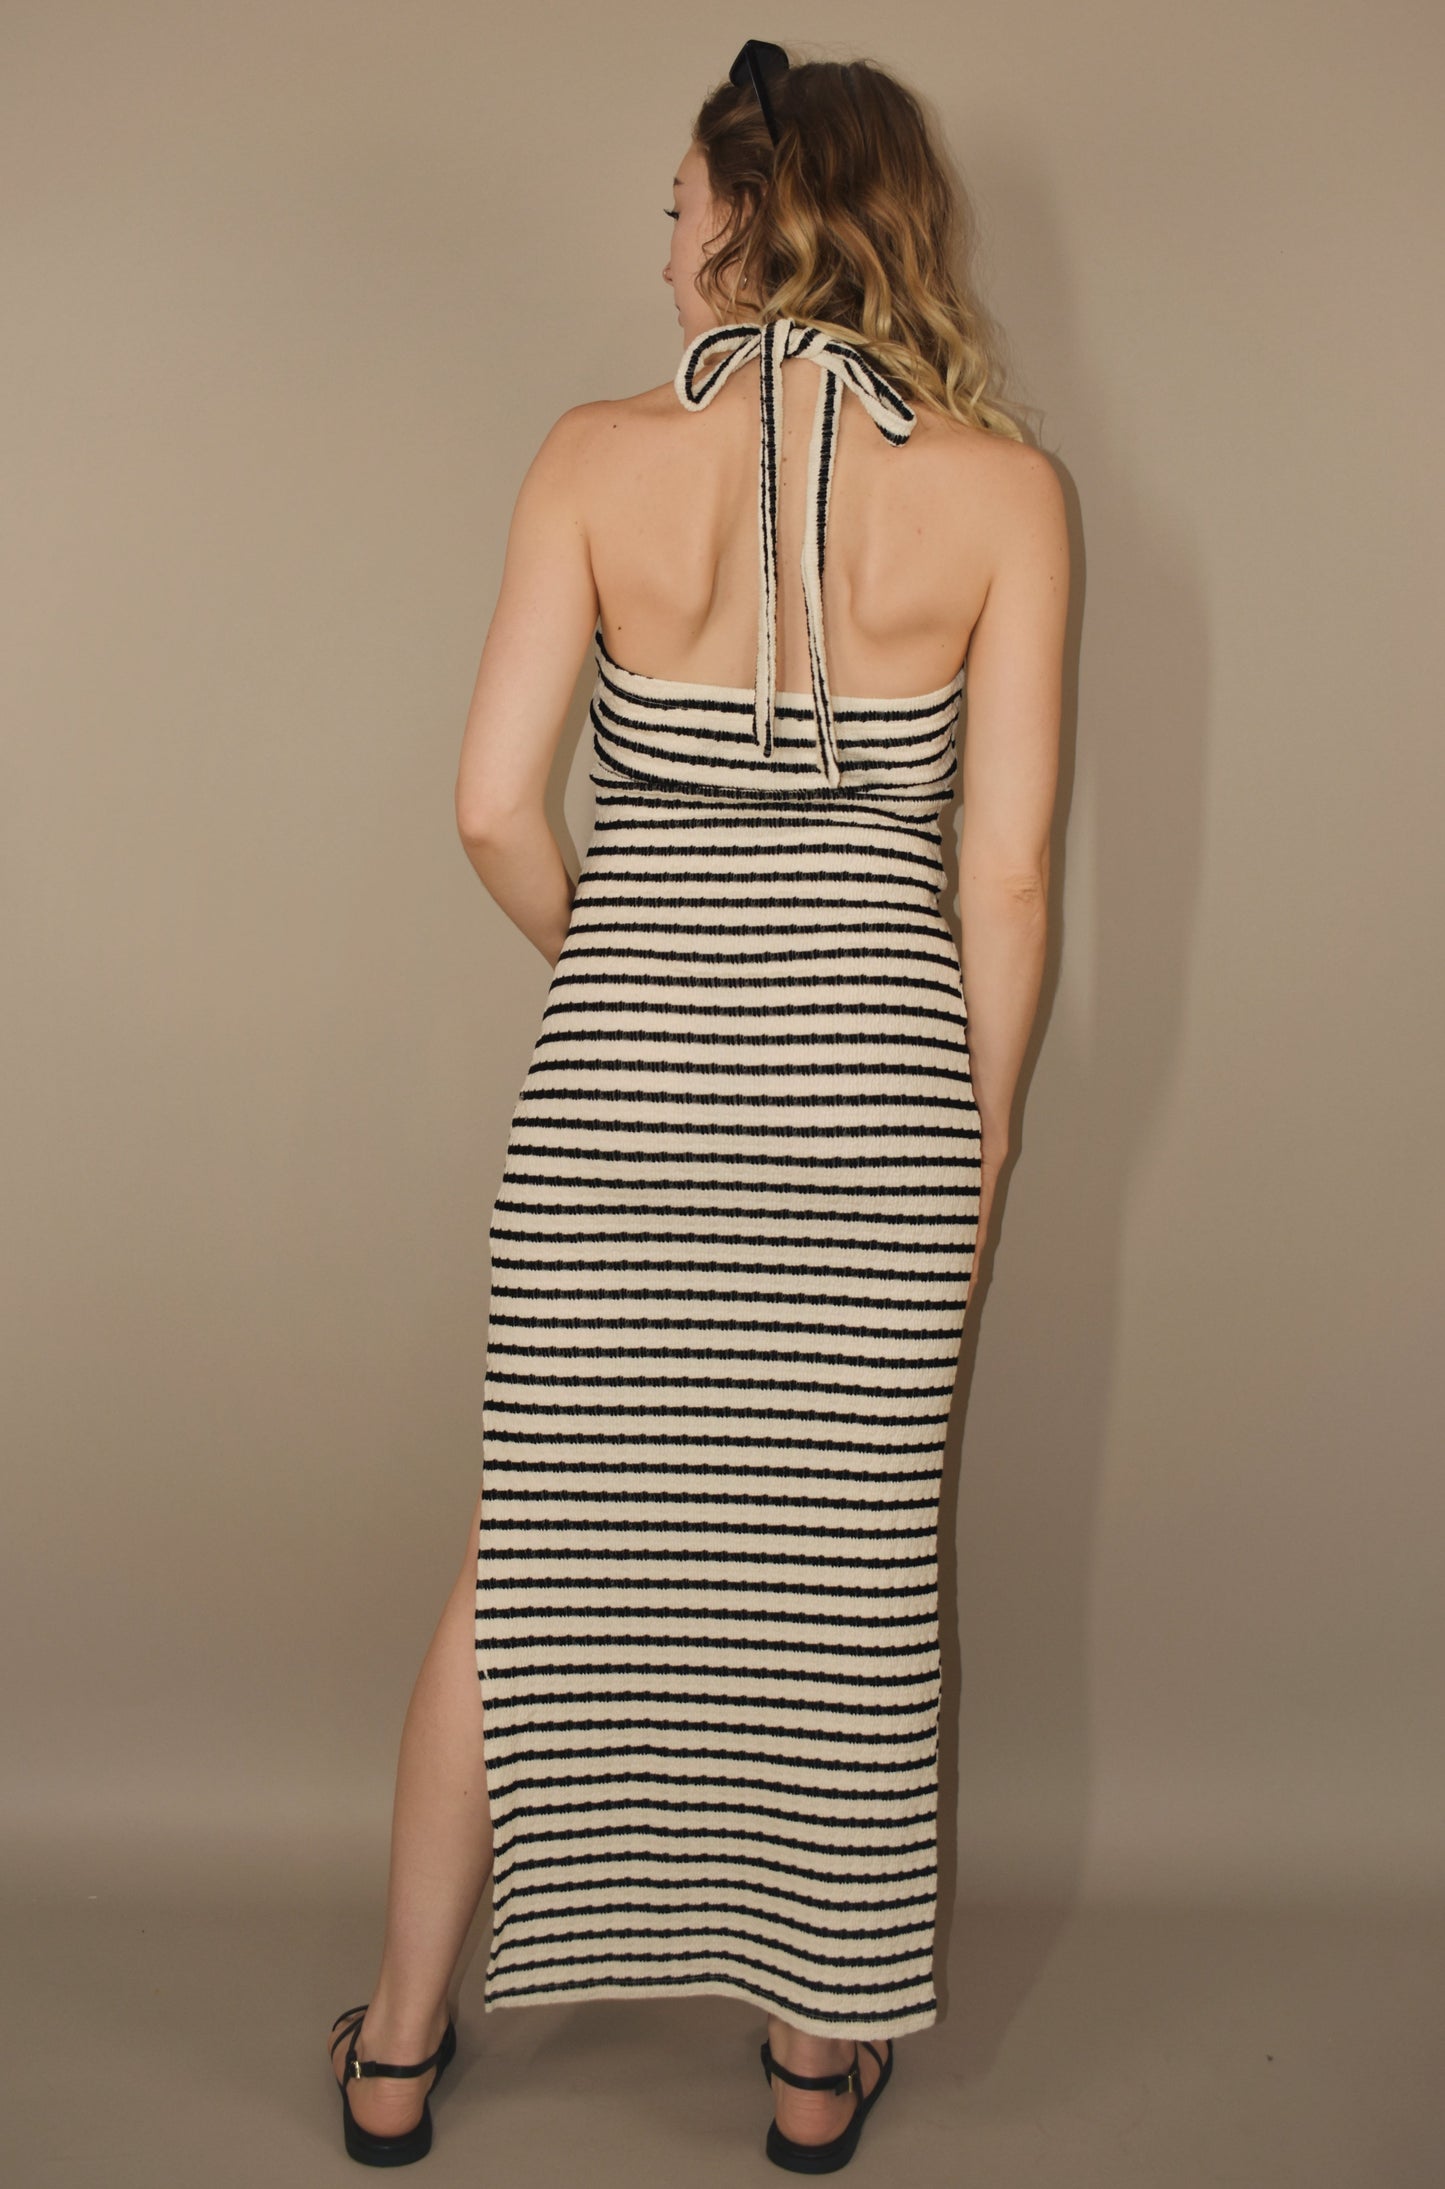 black and white striped midi dress with side slit and halter ties. twist front with triangle cut out. thick yet lightweight stretchy ribbed fabric.